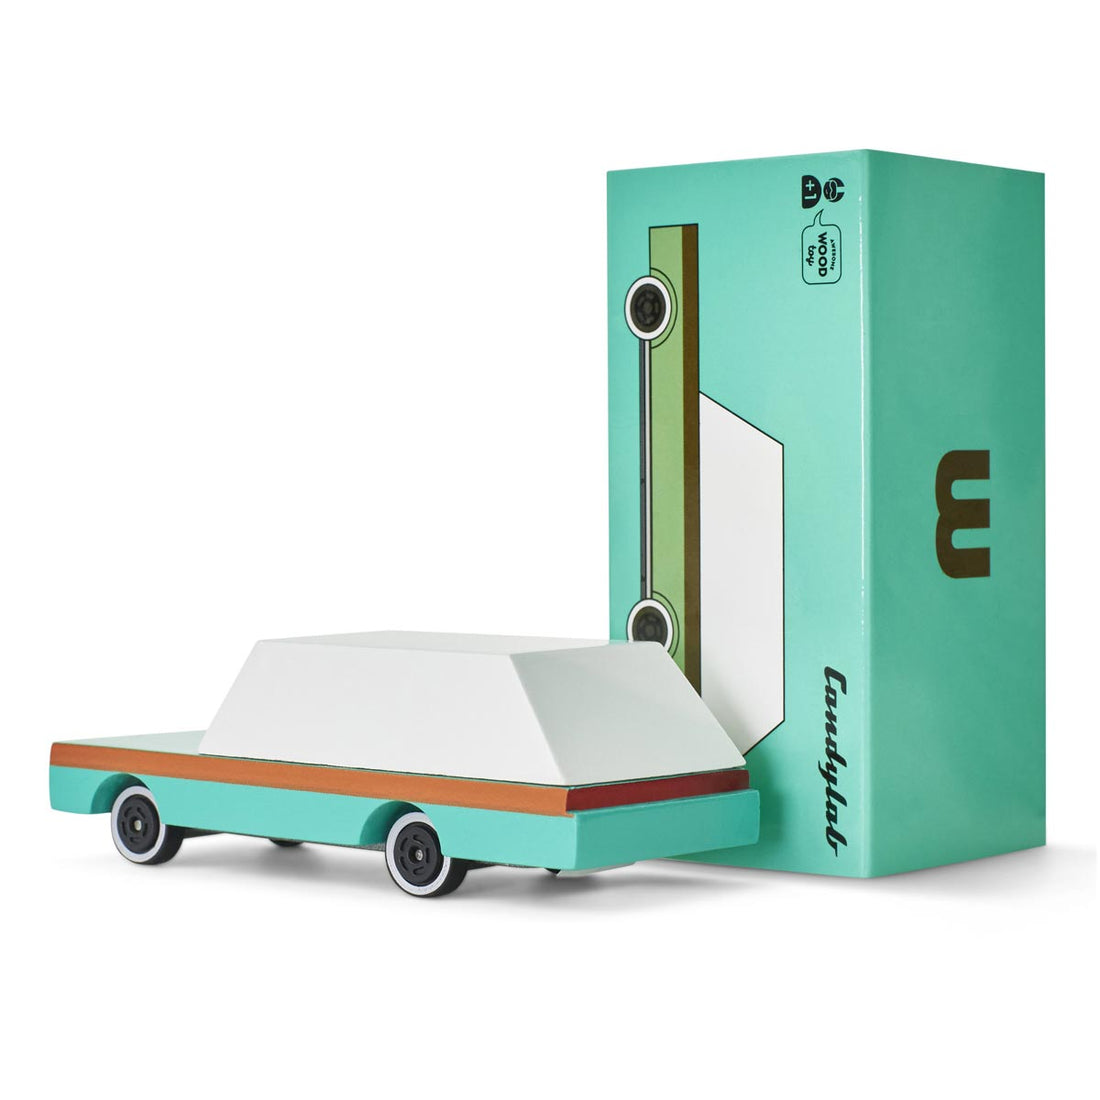 Candylab's Candycar in Teal Wagon • Vintage Wooden Station Wagon Car • Whimsical, Modern, Non-Toxic